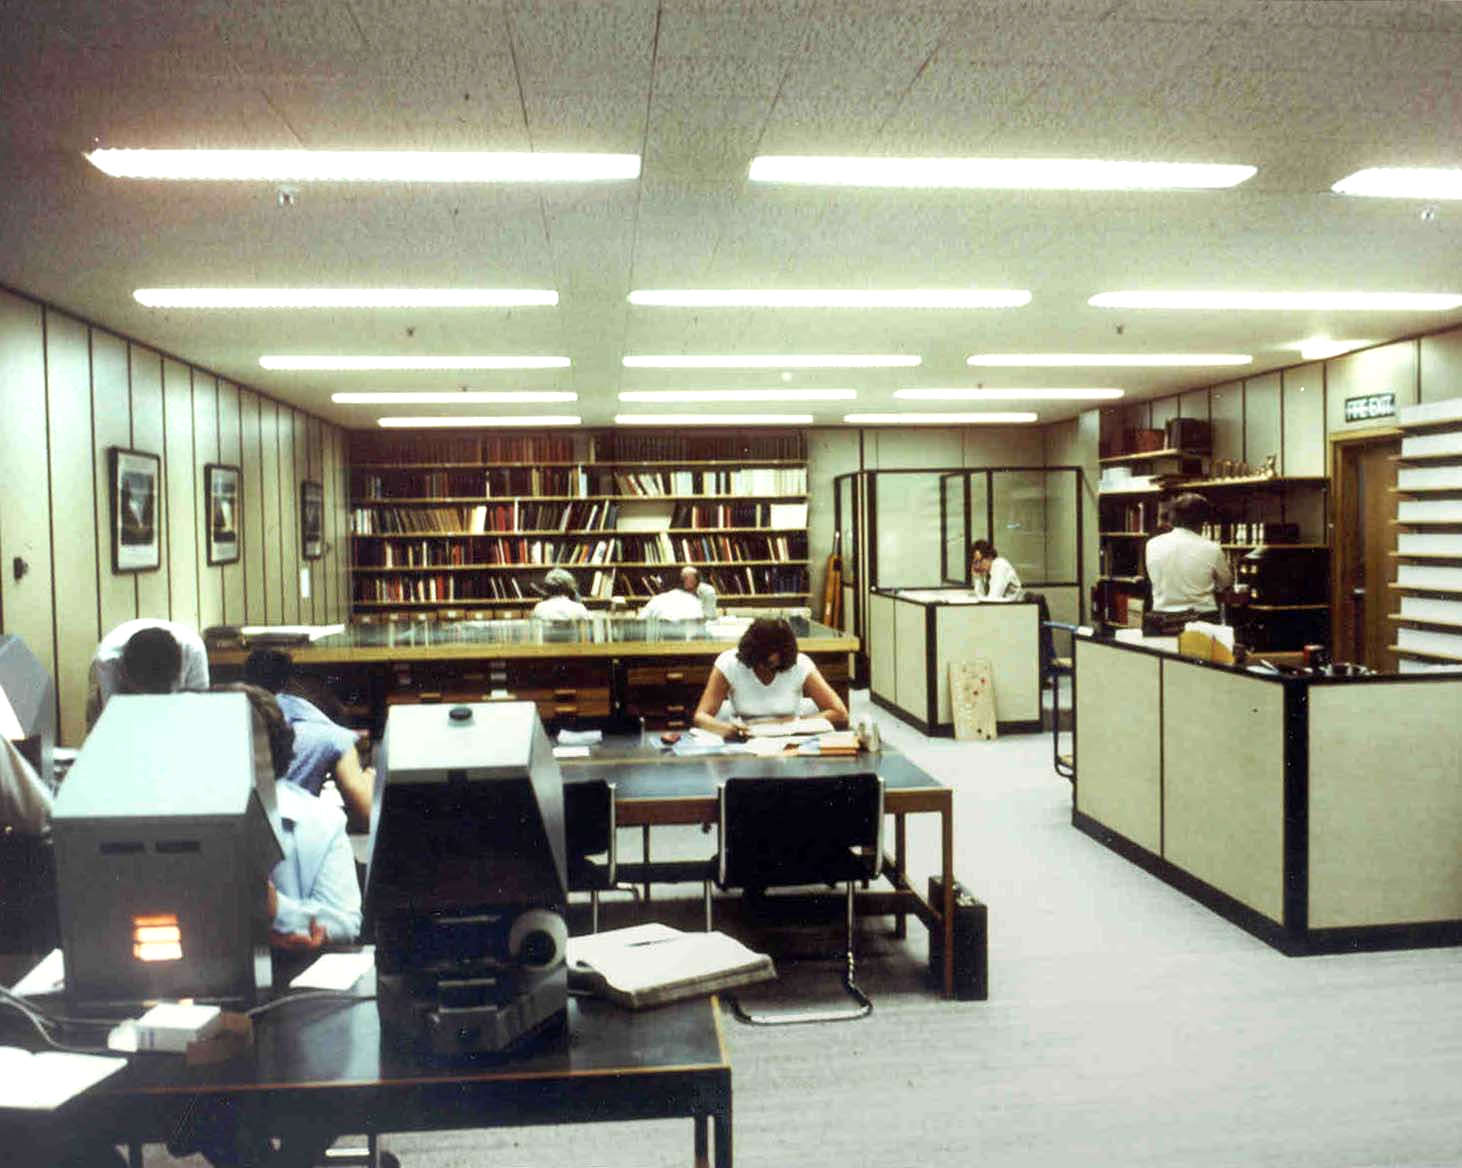 Shire Hall searchroom of the Royal Berkshire Archive 1980s with people sat at desks.